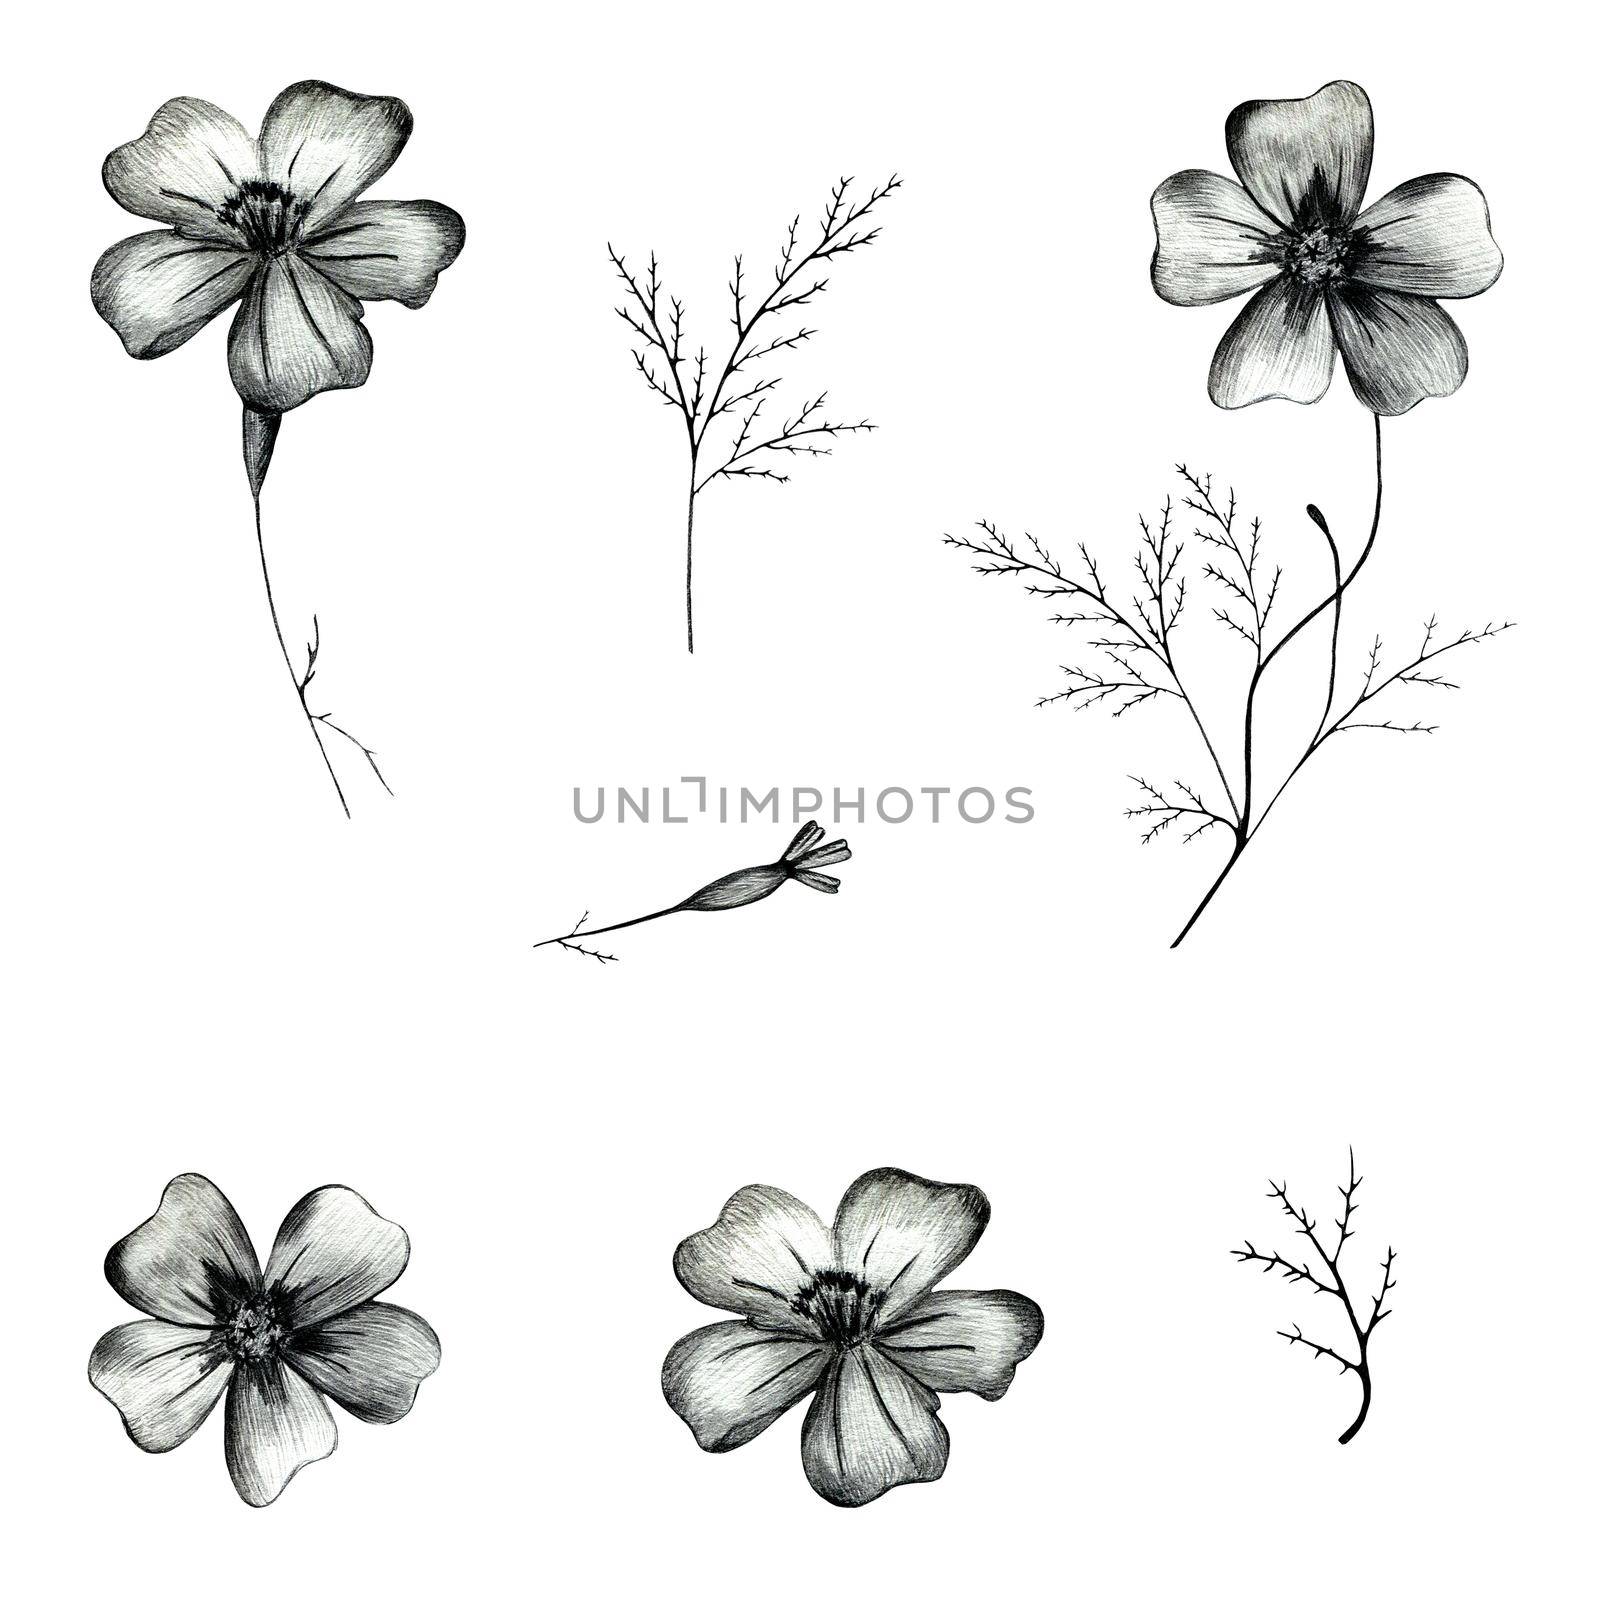 Set of Black and White Hand Drawn Marigold Flower Isolated on White Background. Marigold Flower Collection Drawn by Black Pencil.